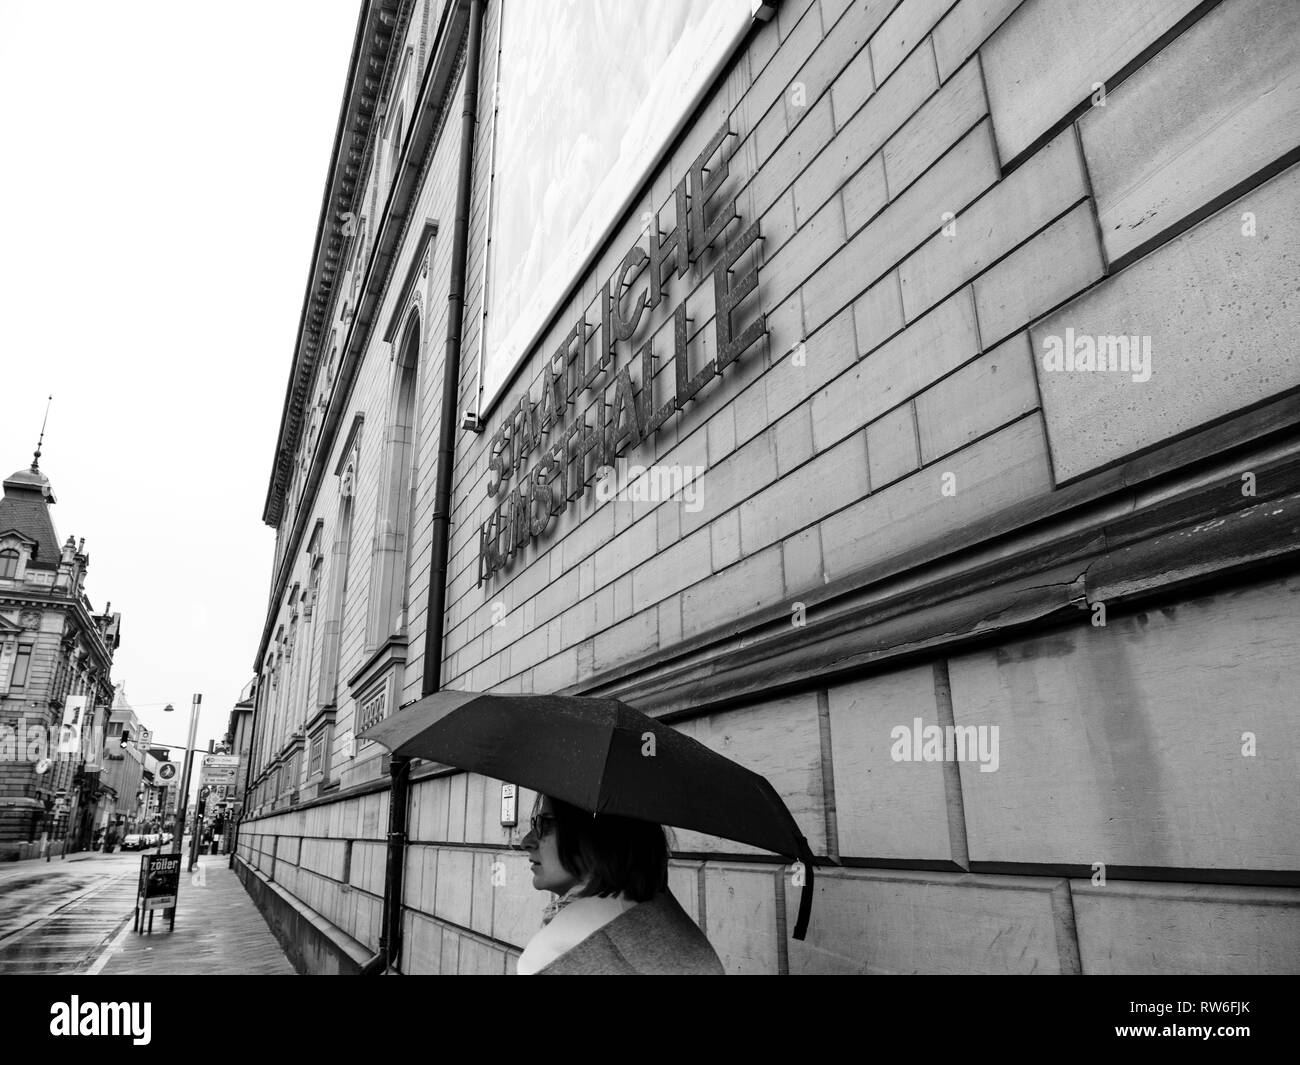 Karlsruhe, Germany - Oct 29, 2017: Staatliche Kunsthalle Karlsruhe State Art Gallery on Hans-Thoma-Strasse street with woman with umbrella on rainy day - black and white Stock Photo